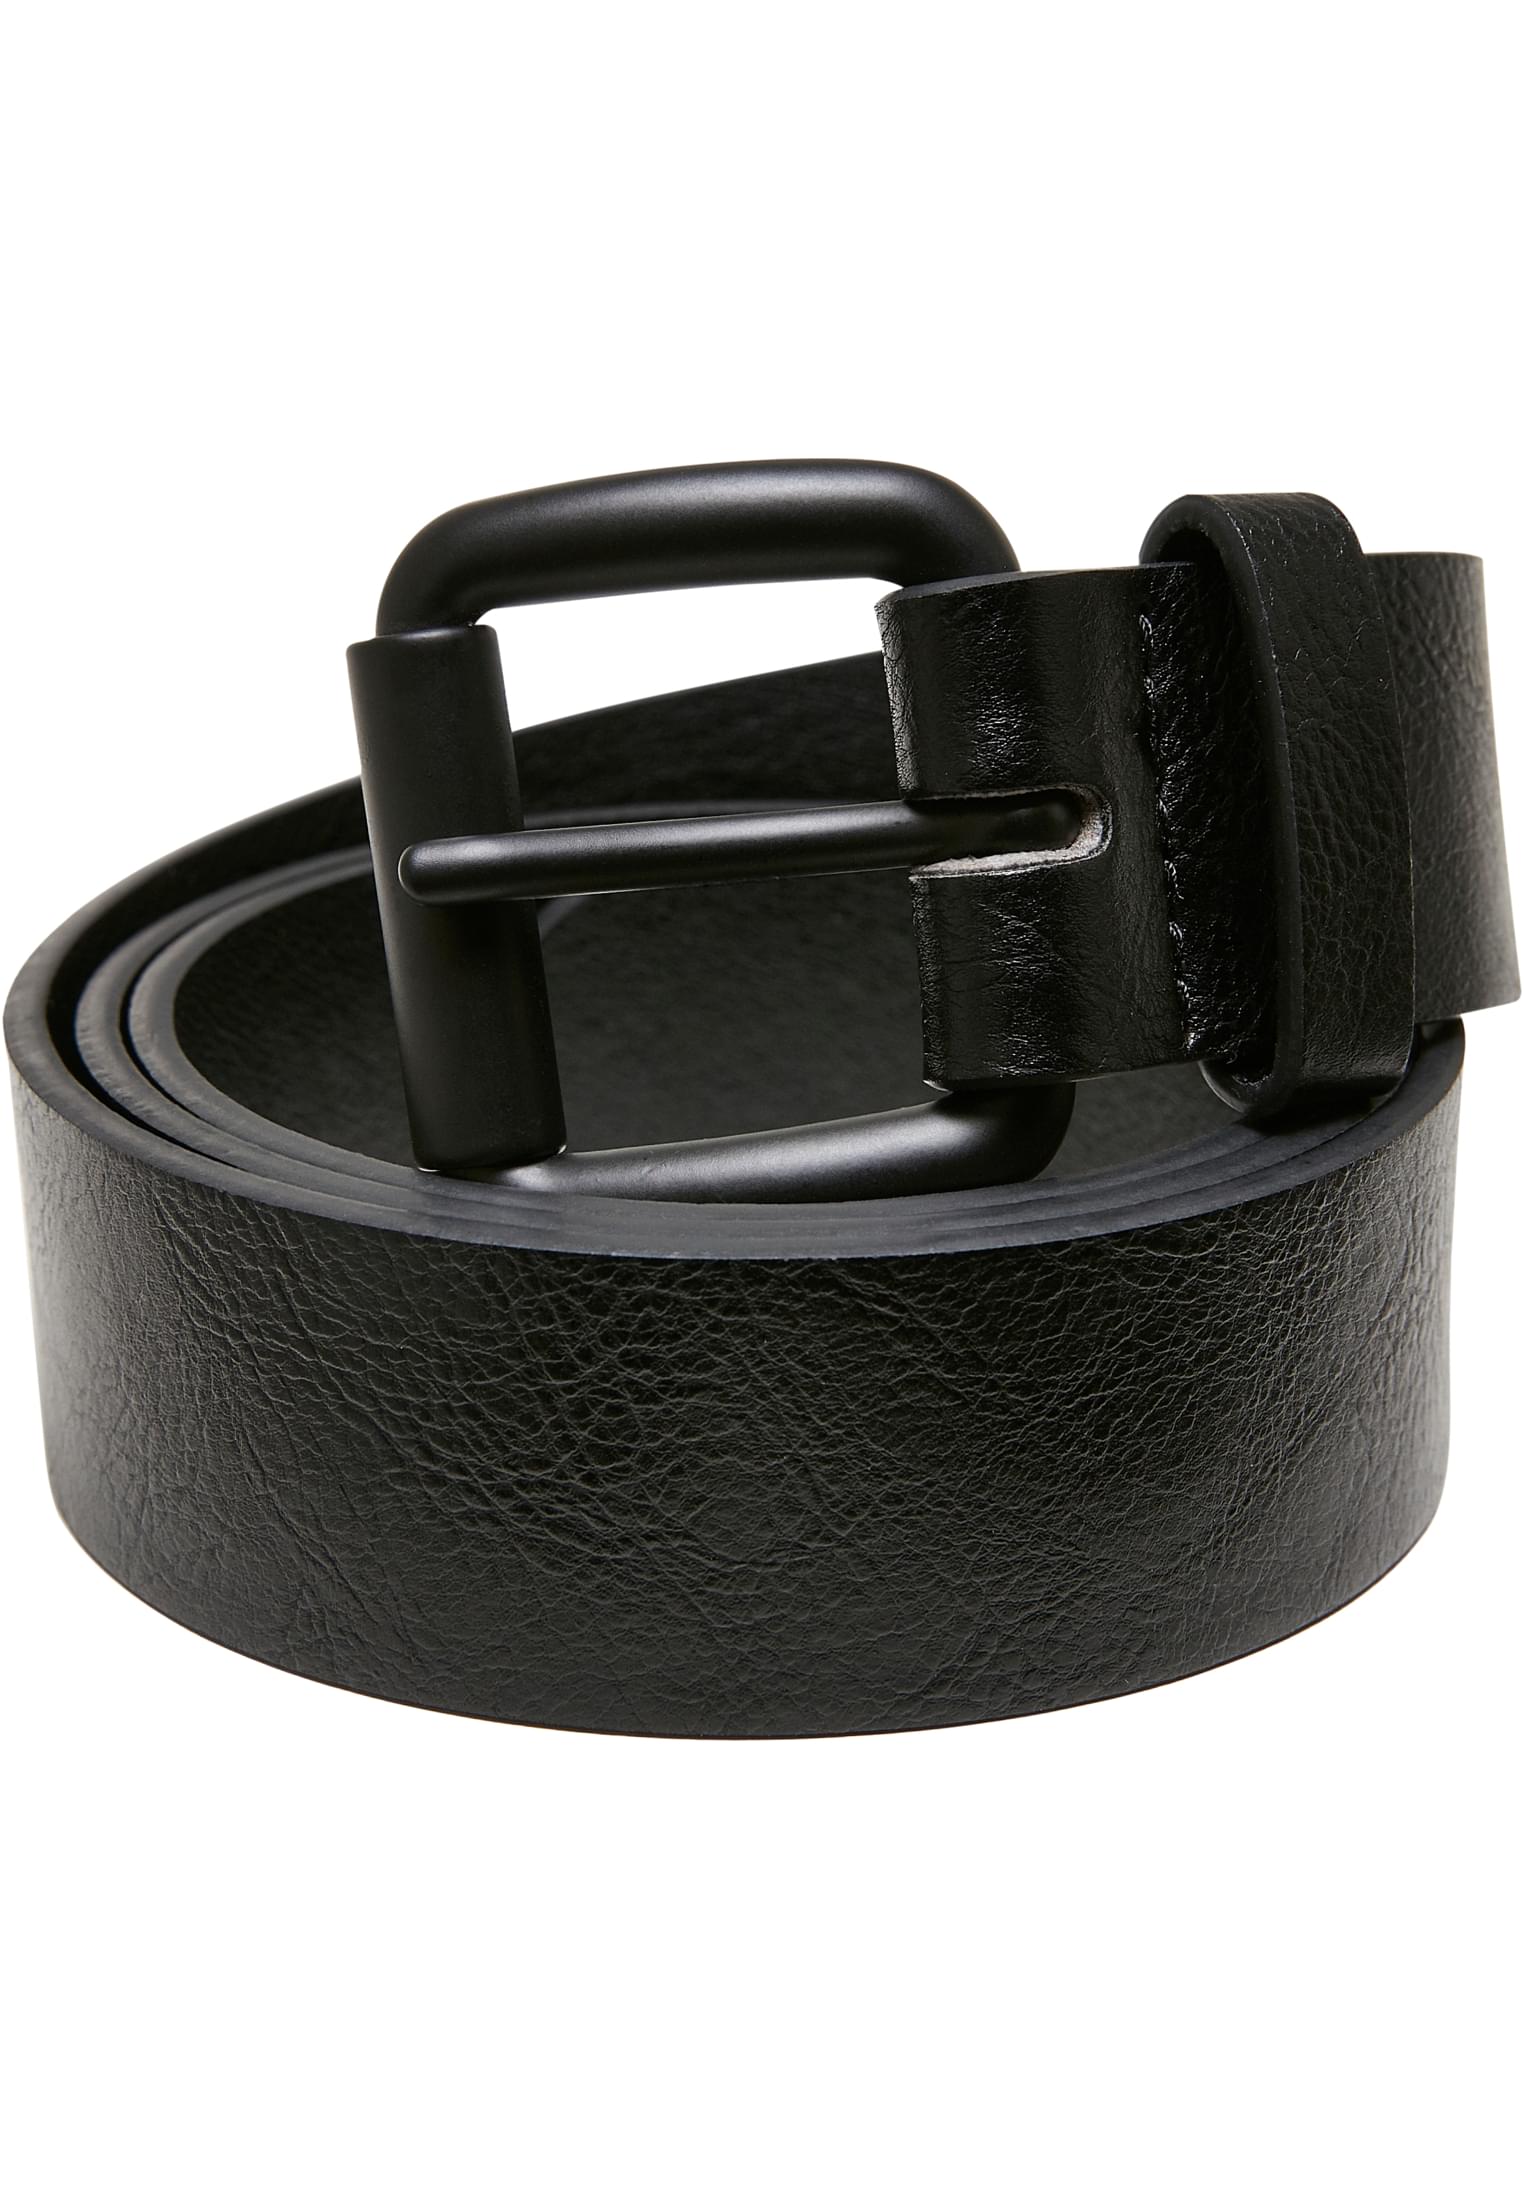 Regular belt with thorn buckle made of synthetic leather black